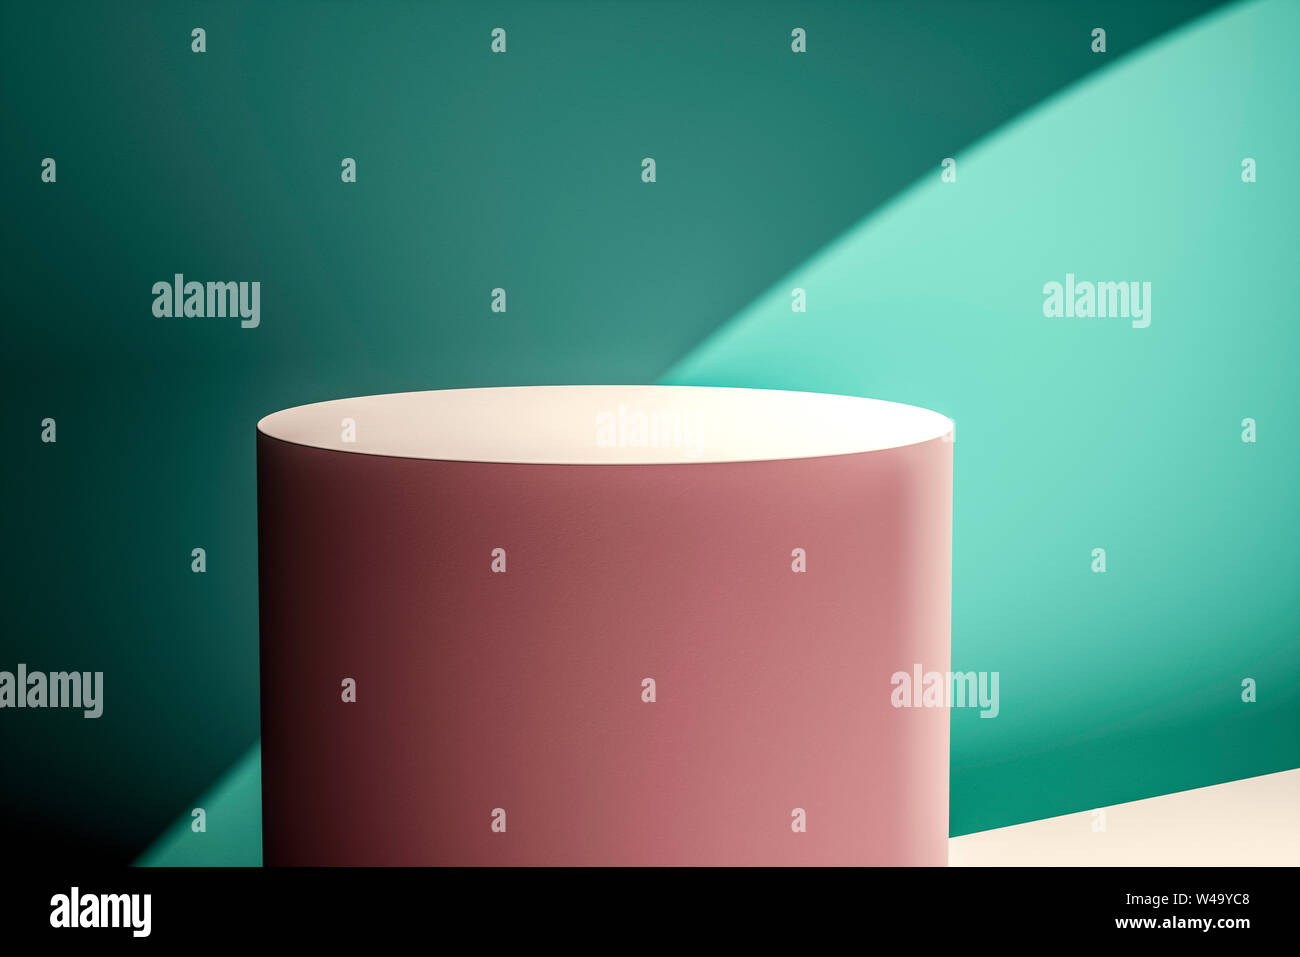 Creative layout made of pink circular product stand against a green wall in a shaft of sunlight creating a mix of perspectives and shadows for a desig Stock Photo